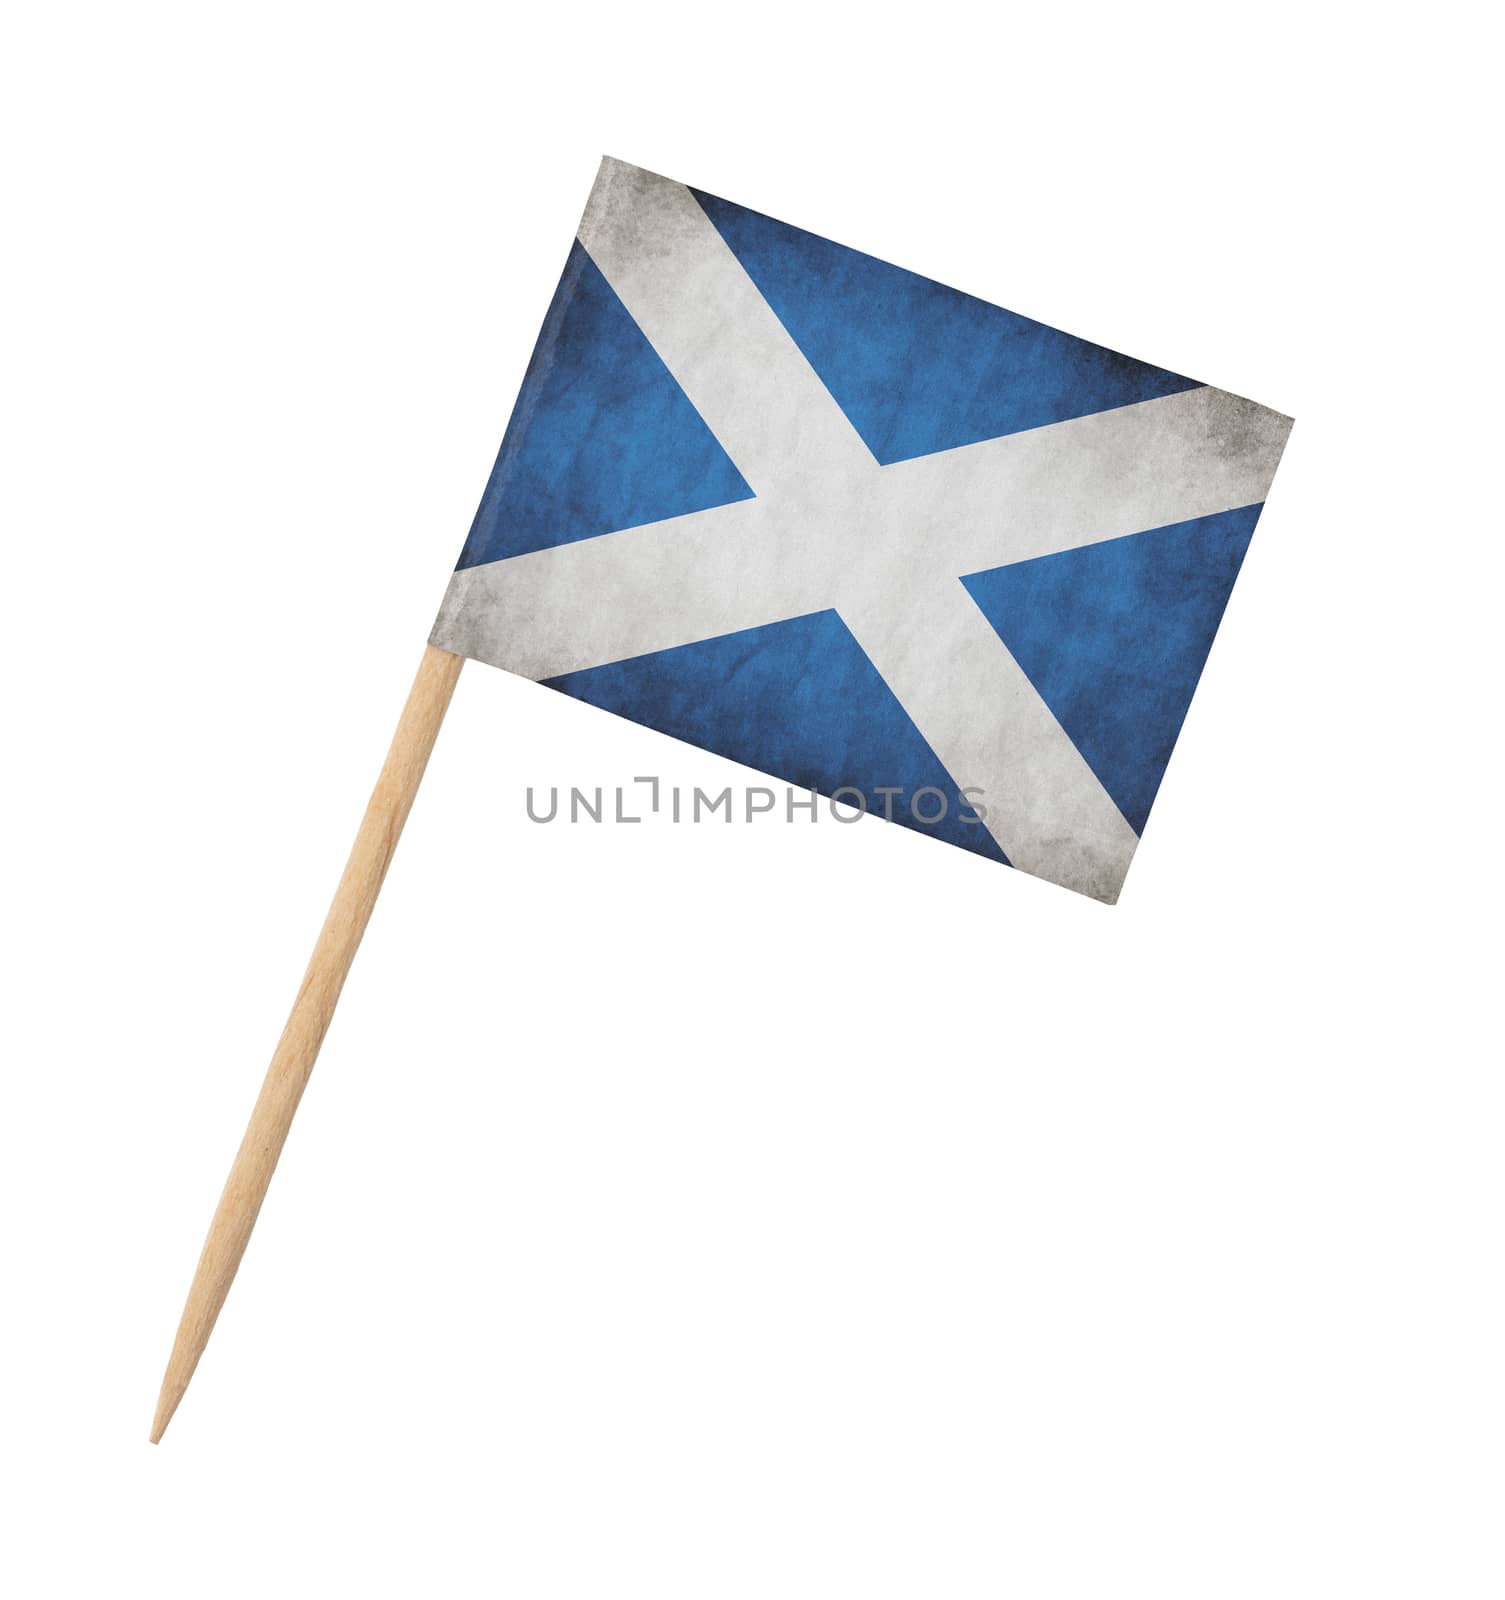 Small paper flag of Scotland on wooden stick by michaklootwijk